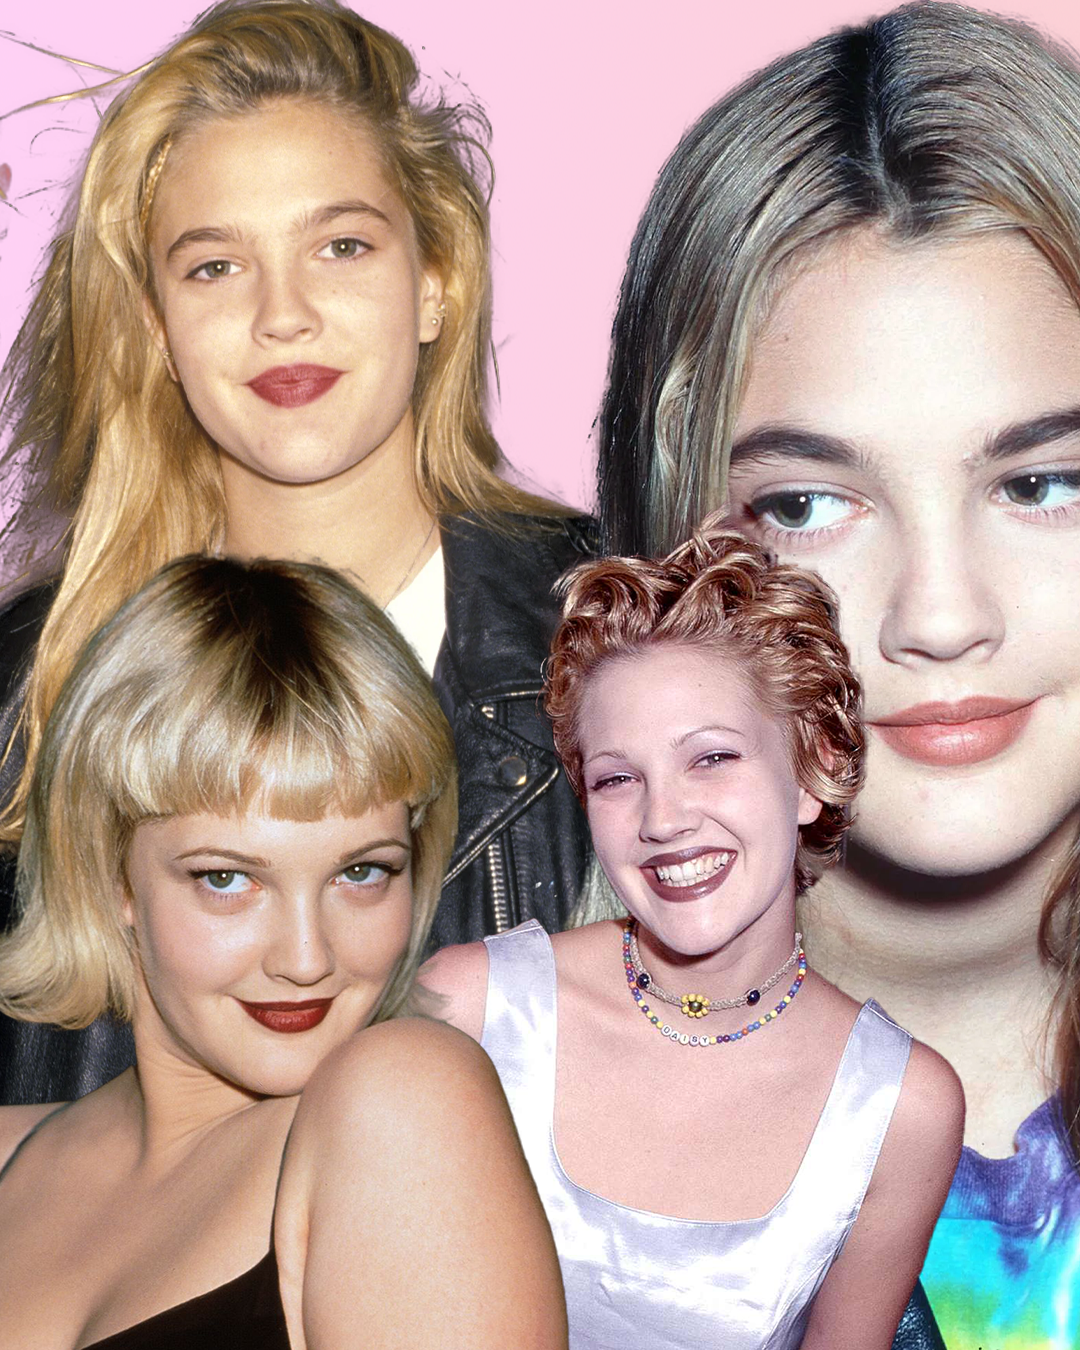 Drew Barrymore's unstoppable rise, still Drew Barrymore is not just a child actress who has made it